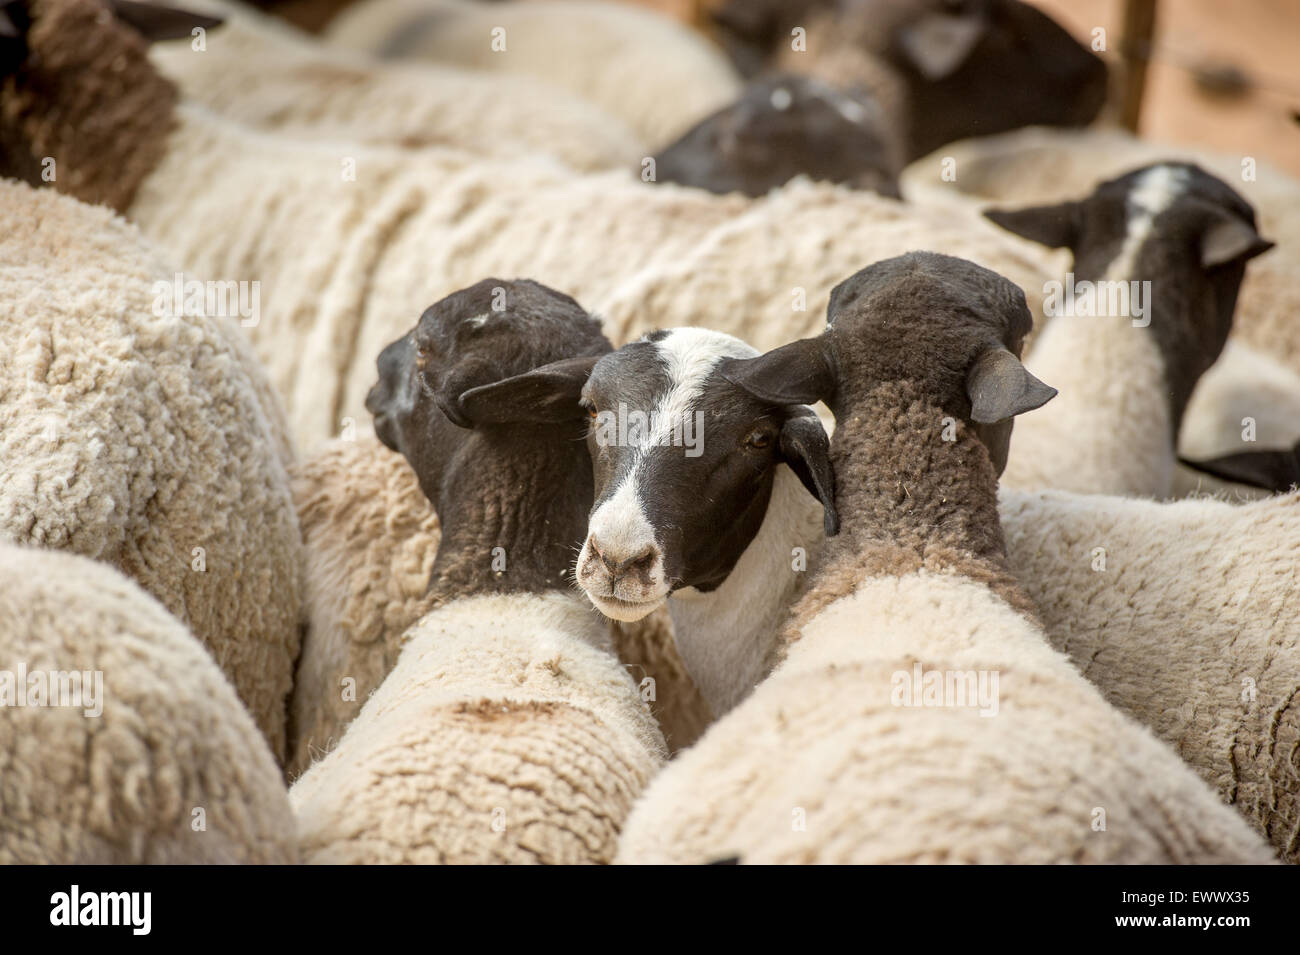 Namibia - Sheep on farm in Africa Stock Photo